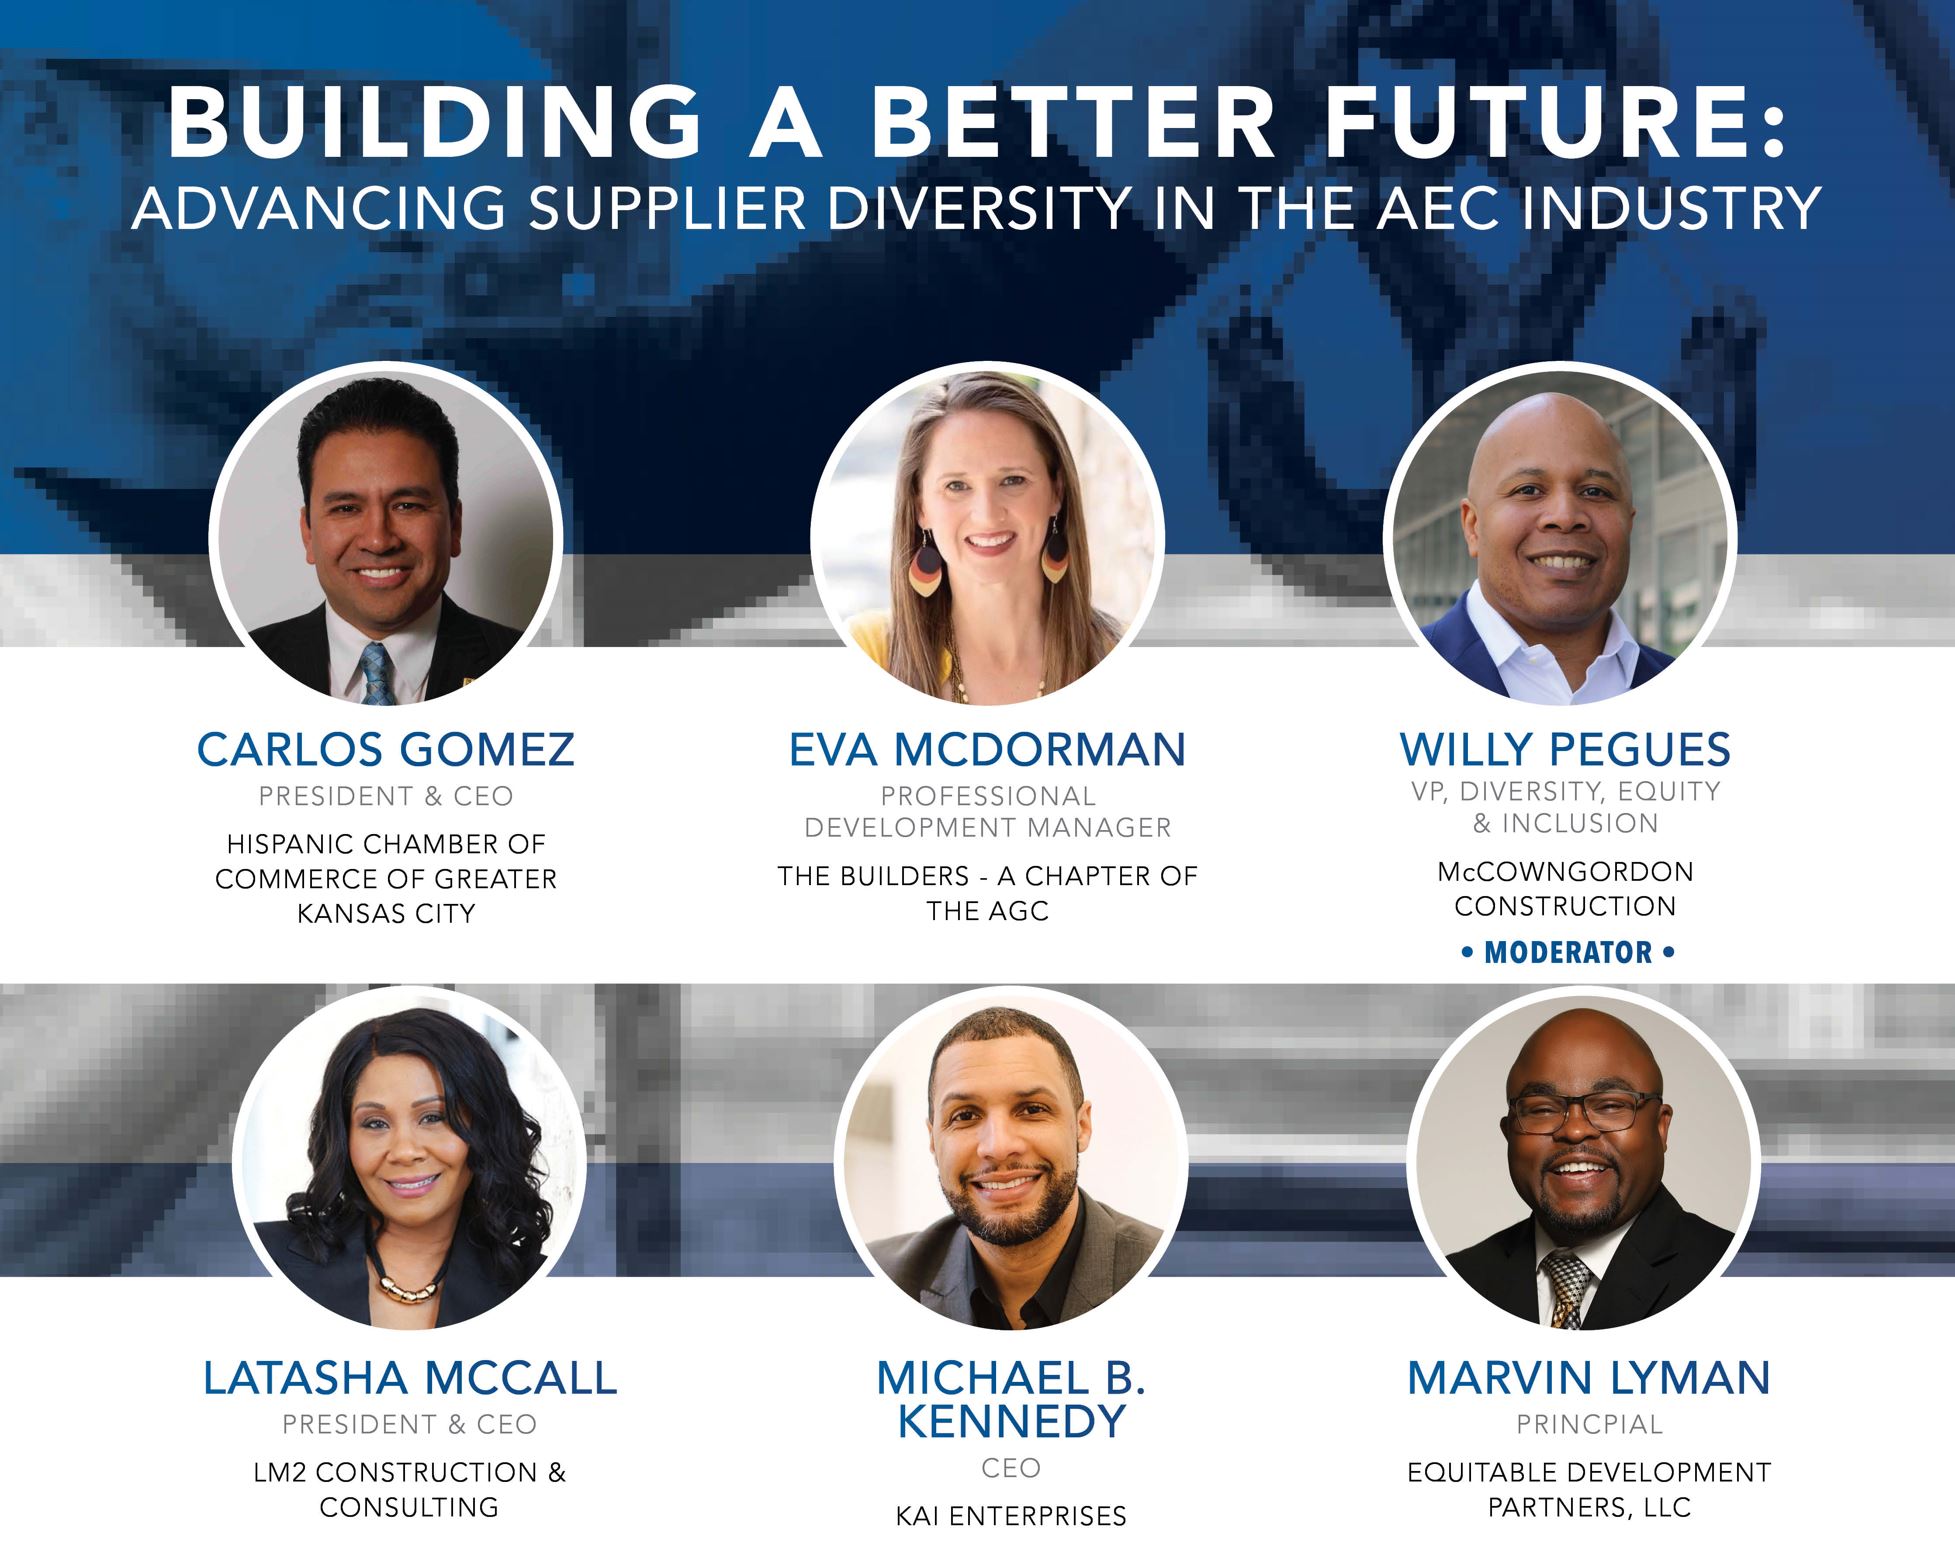 Building a Better Future: Advancing Supplier Diversity in the AEC Industry